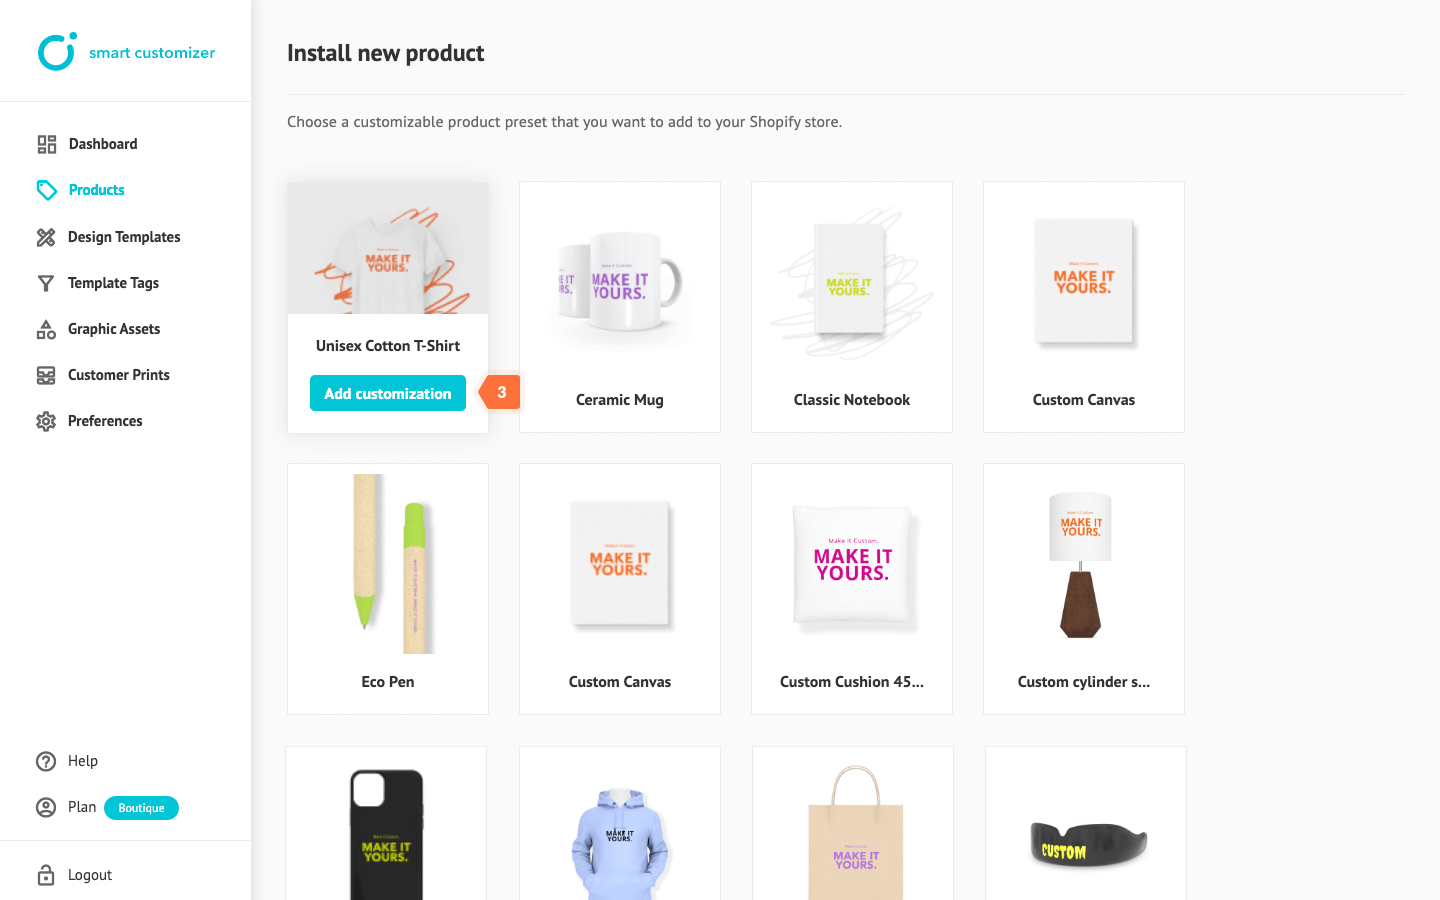 Ready to use product templates for customization